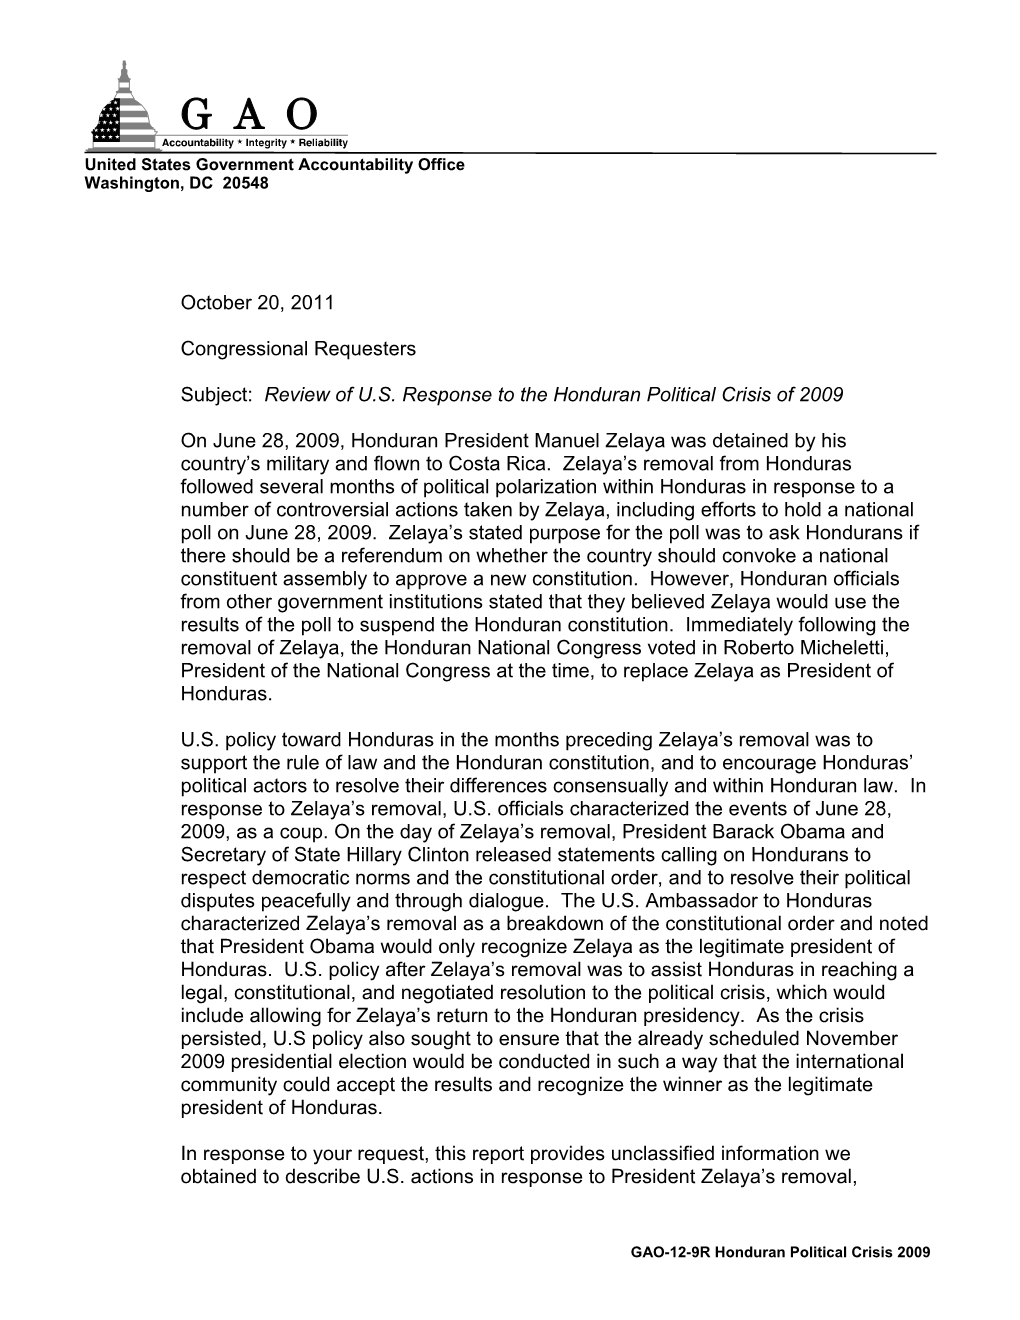 GAO-12-9R Review of U.S. Response to the Honduran Political Crisis Of